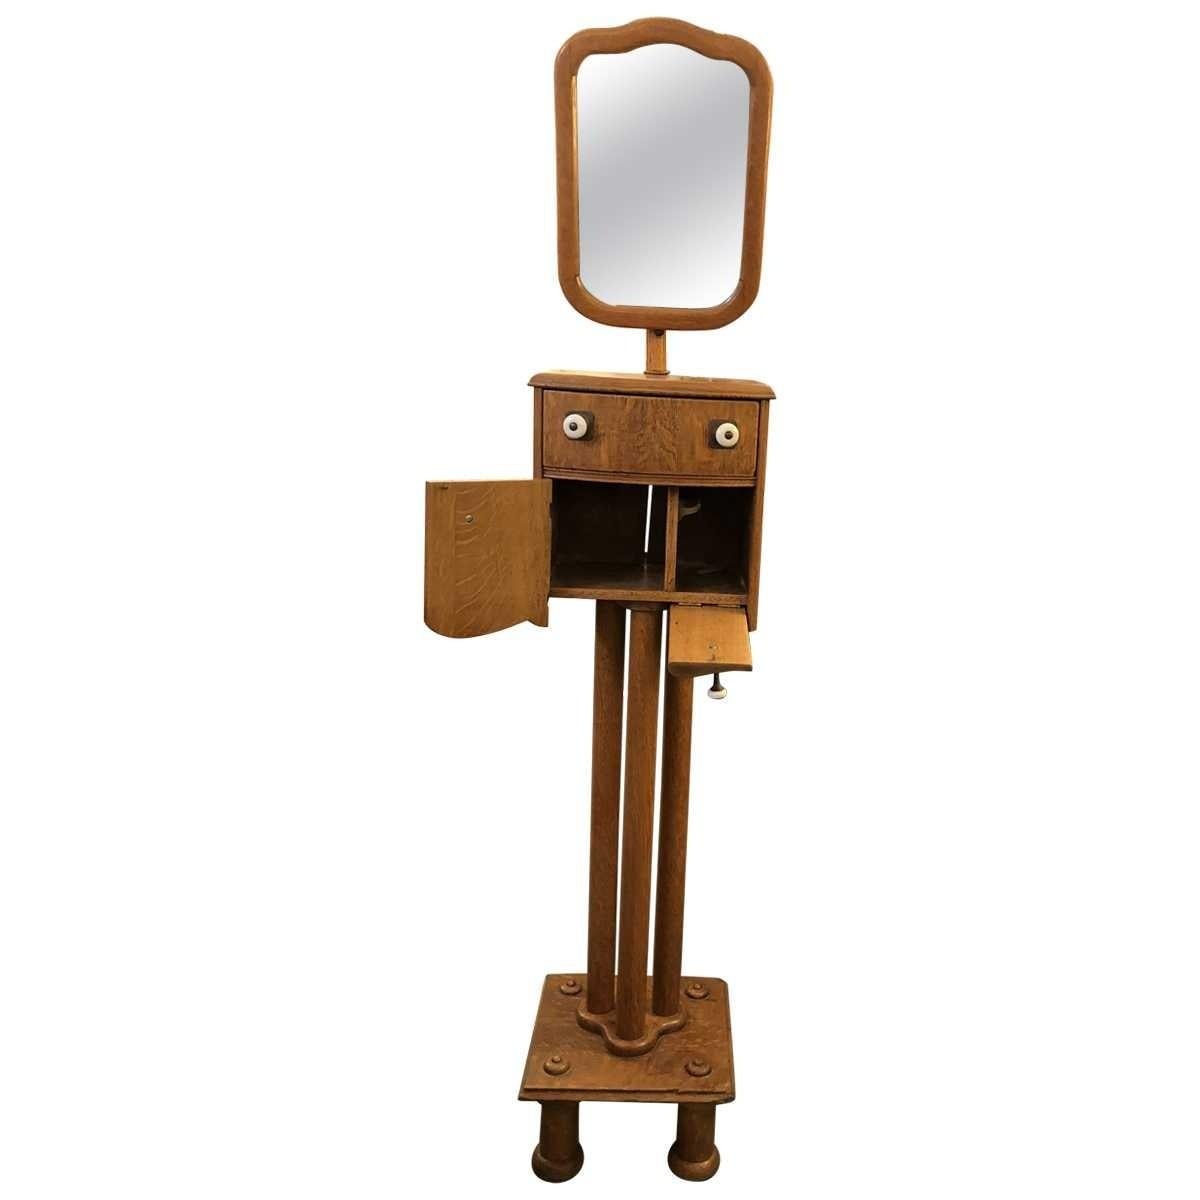 Mid-Century Modern mirror on stand.
Pieces are both casual and visually appealing, taking inspiration from themes such as Folk Art and farmhouse decorating styles.
Materials oak, porcelain, brass
Dimensions:
Width 13